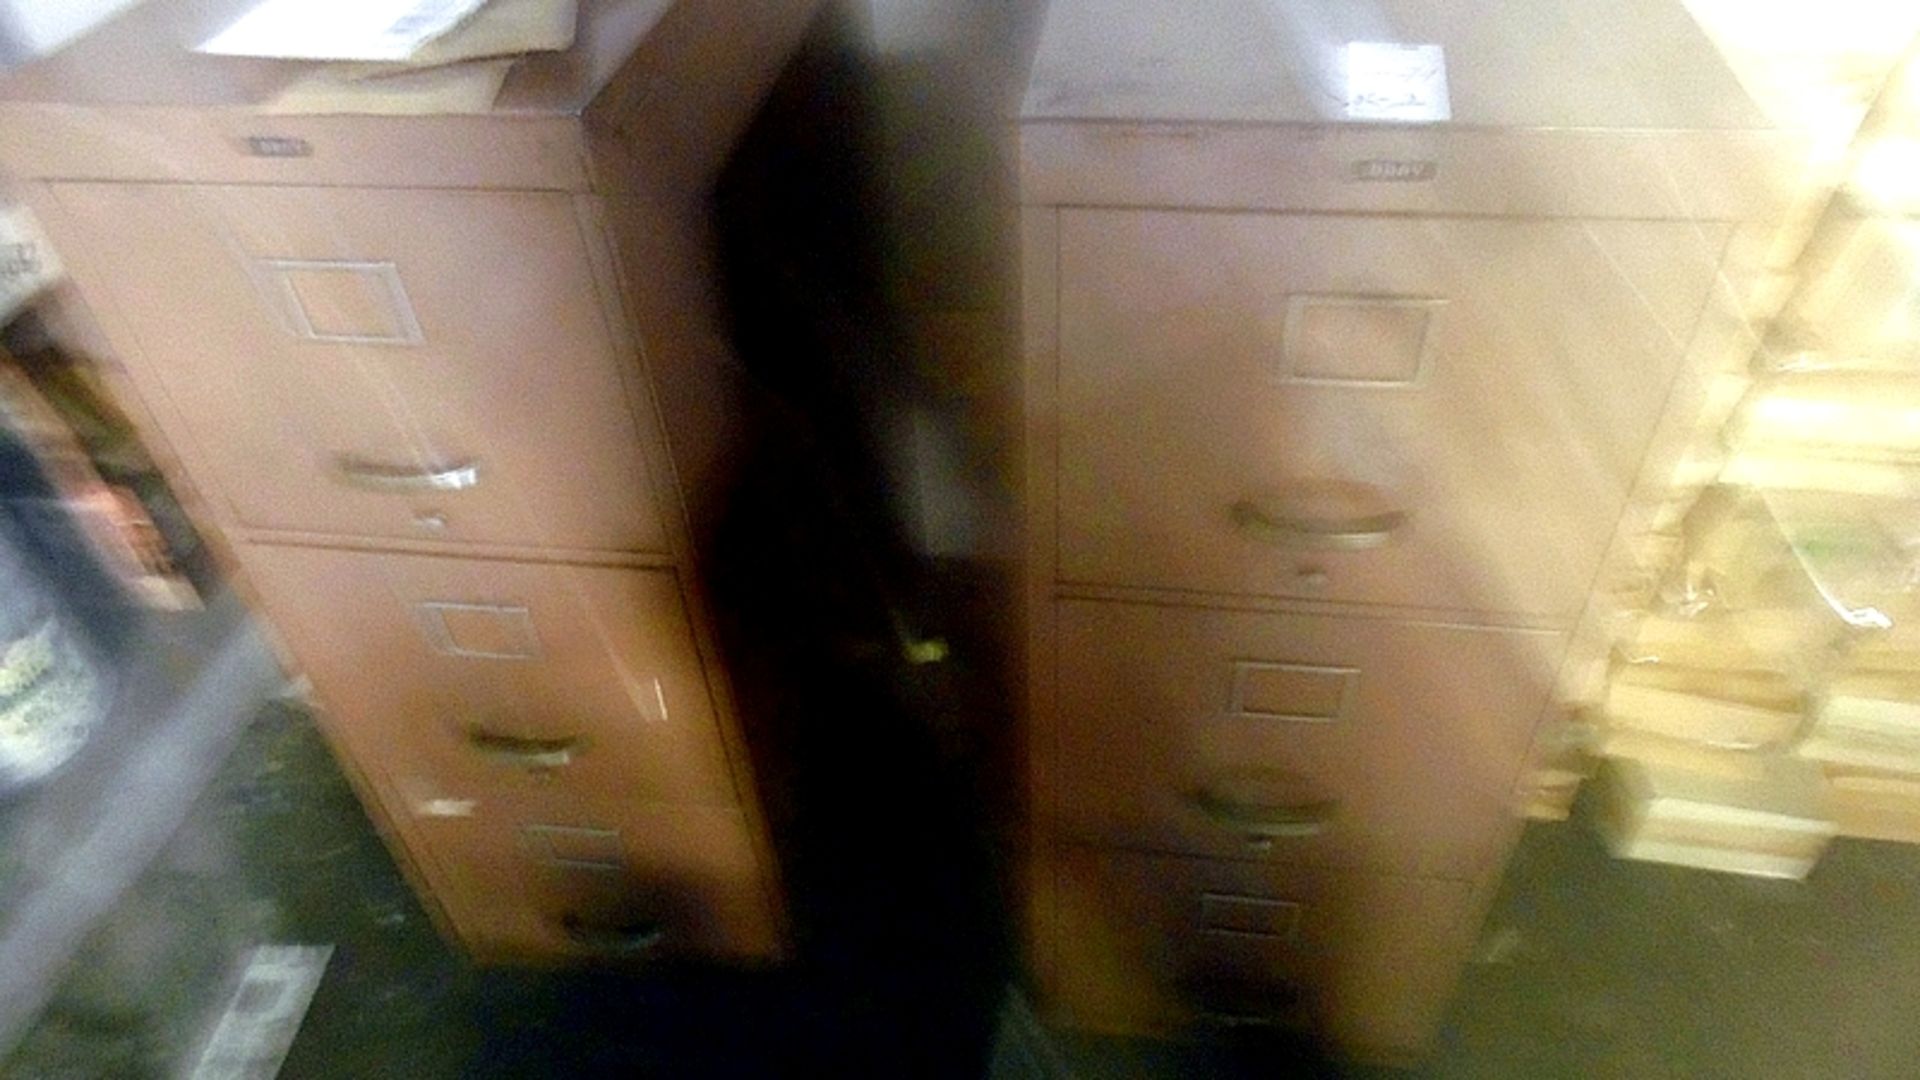 FILE CABINETS w/ CONTENTS